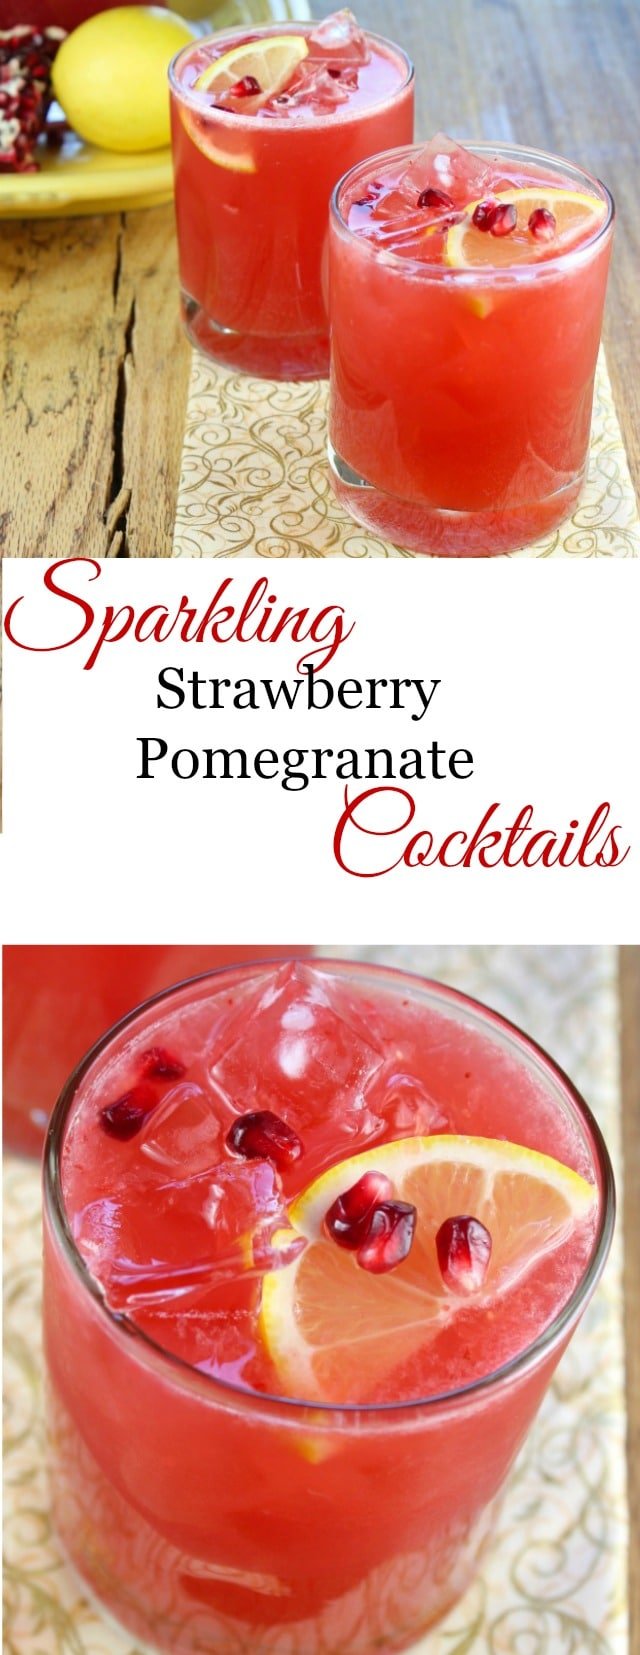 Sparkling Strawberry Pomegranate Cocktails - Miss in the Kitchen